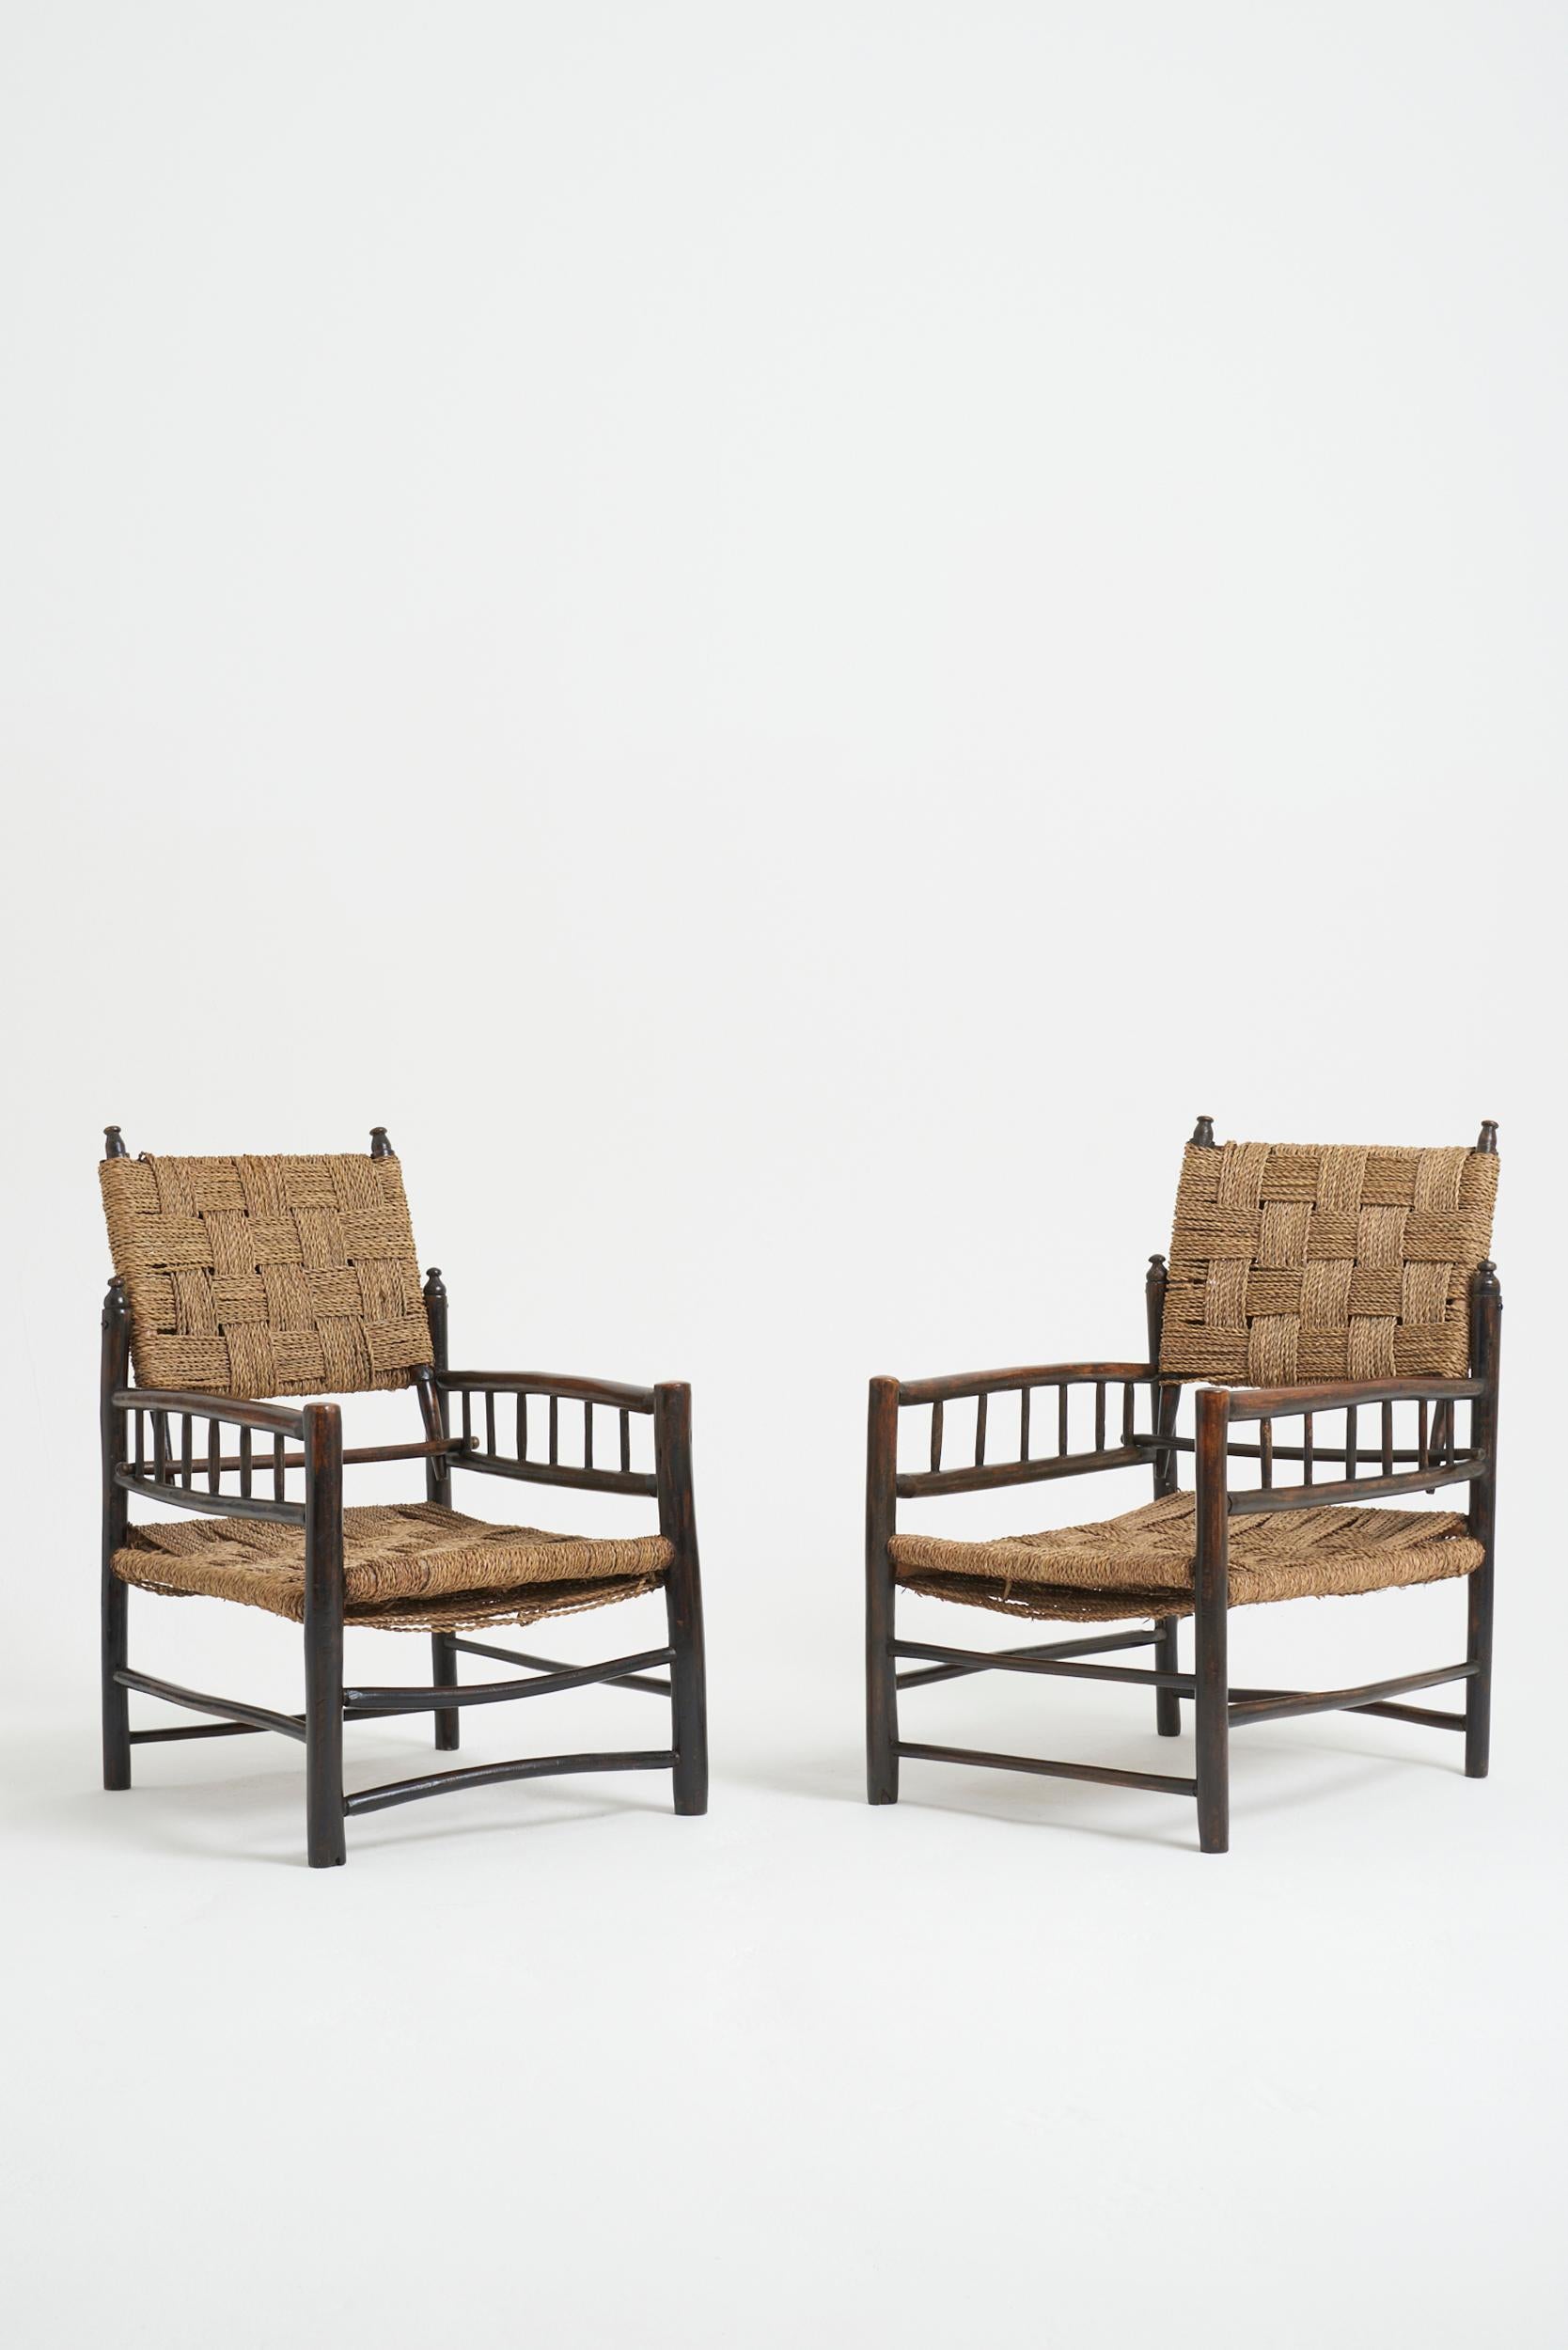 A pair of vernacular armchairs, with rope seats and backs.
France, first half of the 20th Century
81 cm high by 51 cm wide by 67 cm depth, seat height 30 cm